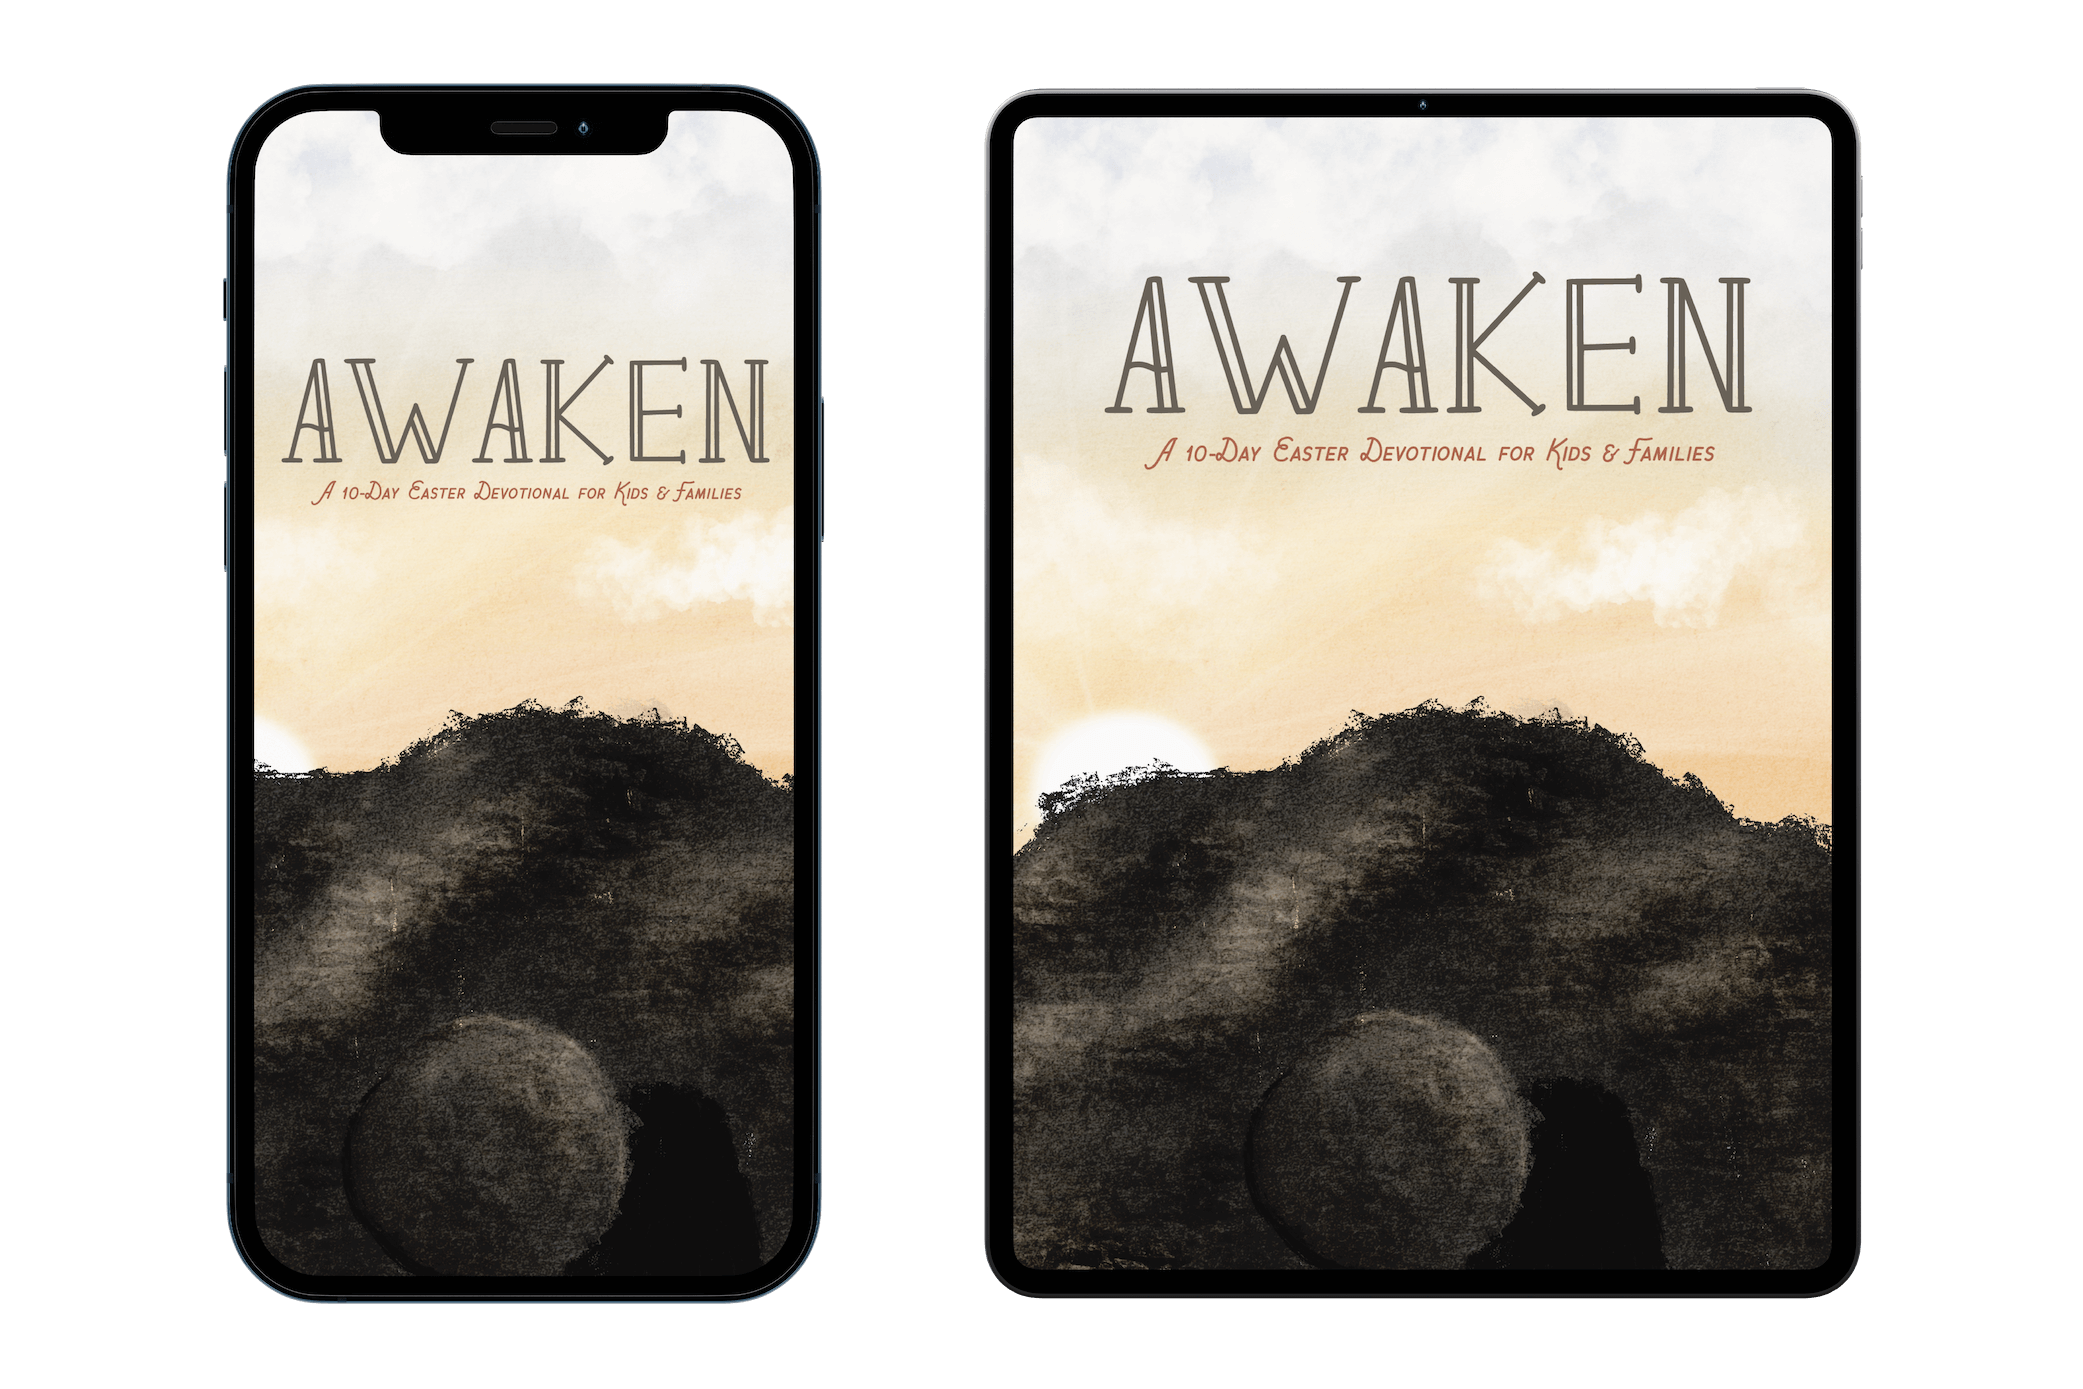 [DOWNLOADABLE VERSION] Awaken: A 10-Day Easter Devotional for Kids & Family